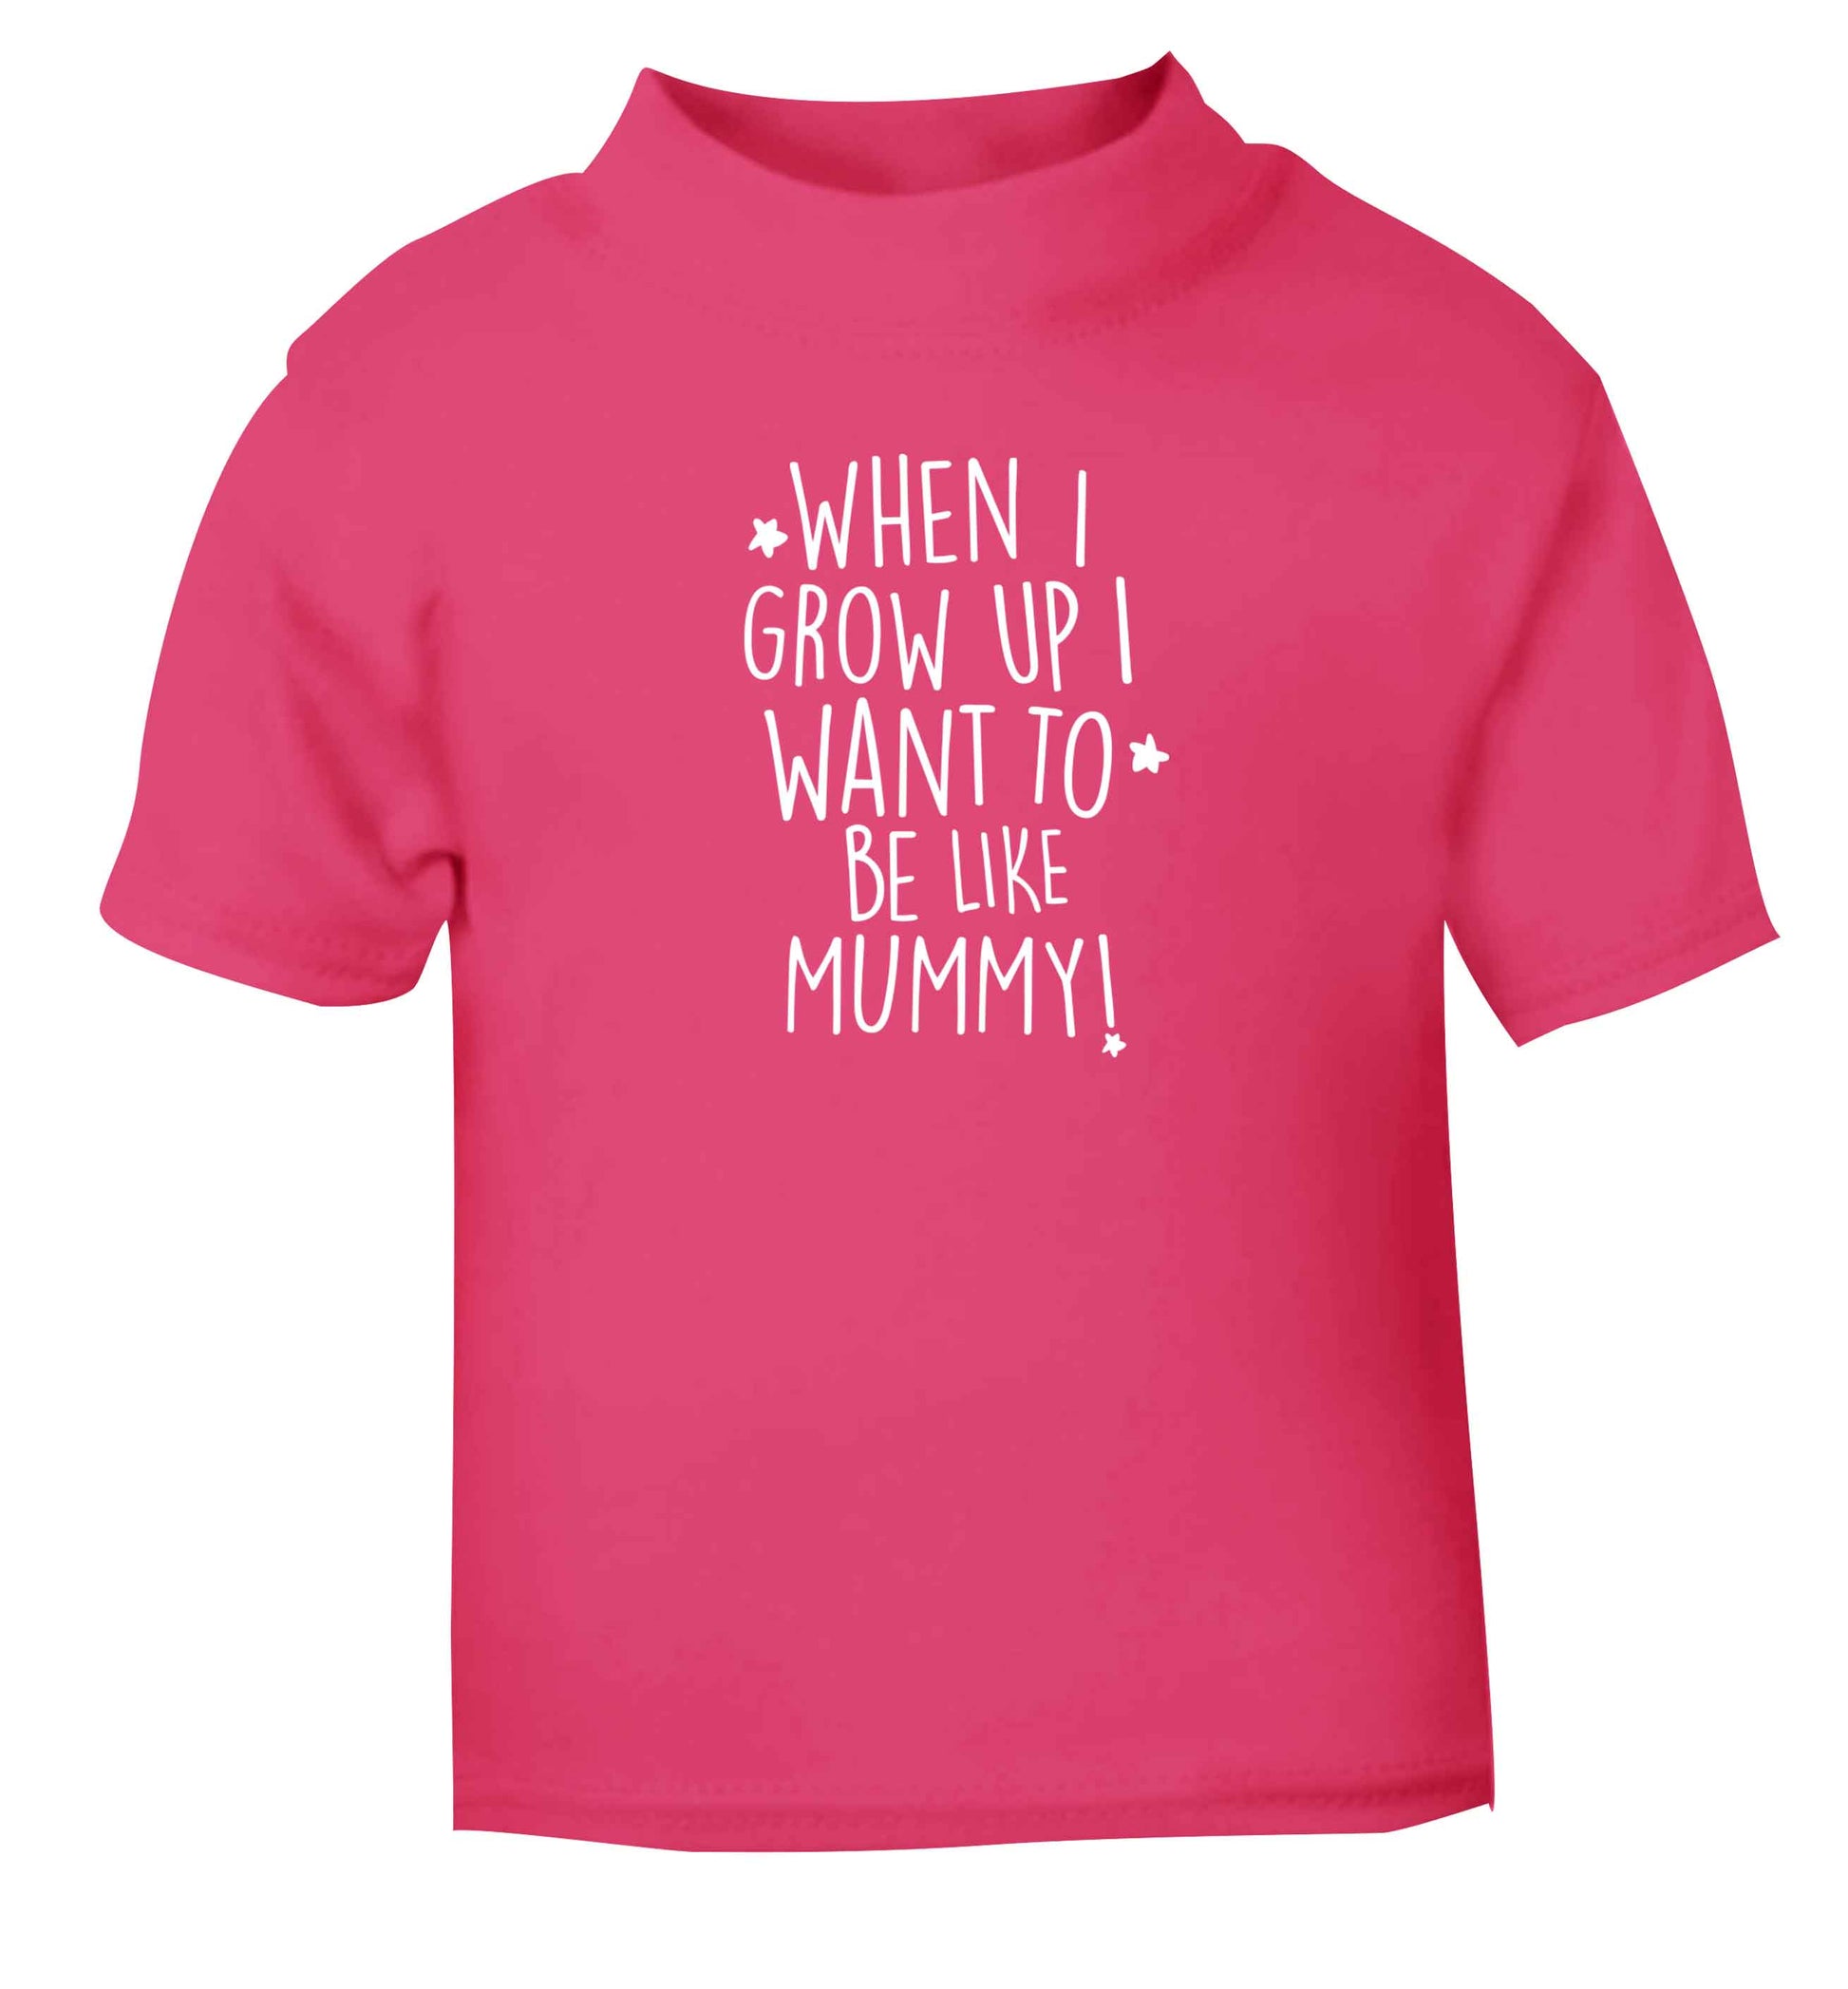 When I grow up I want to be like my mummy pink baby toddler Tshirt 2 Years